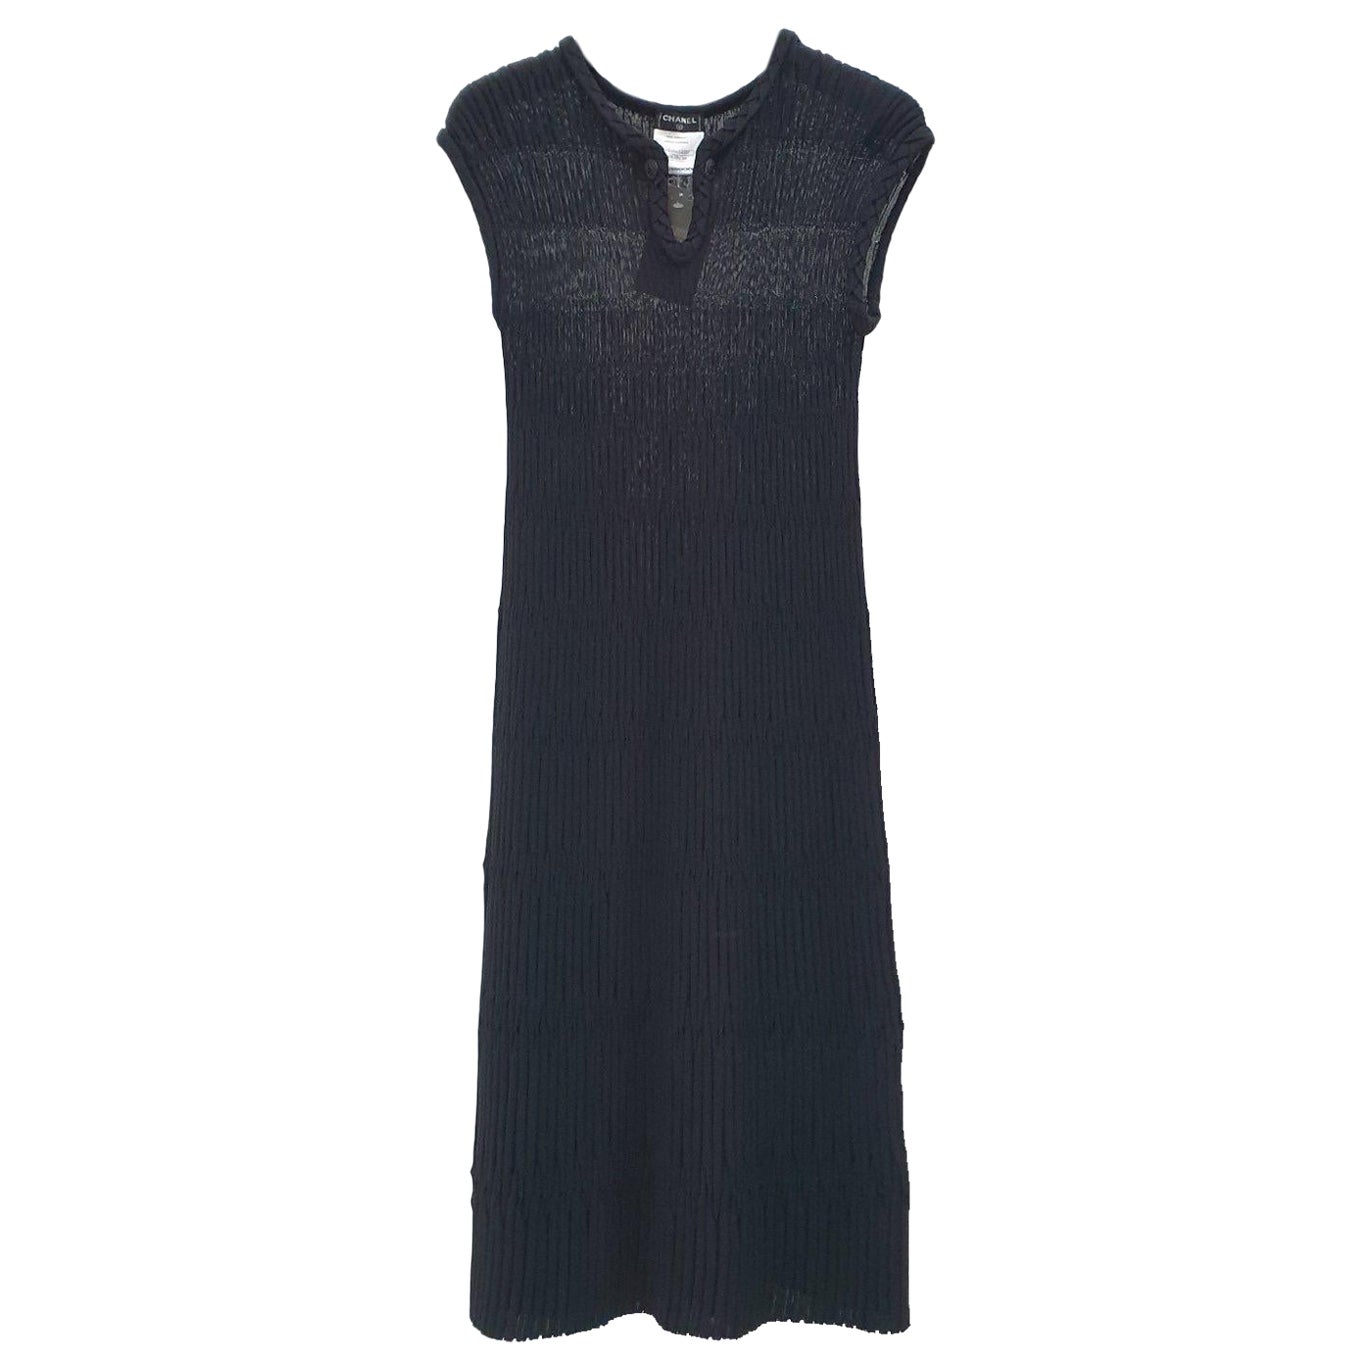 CHANEL Black Textured Cotton Jacquard Knit Sleeveless Dress   For Sale